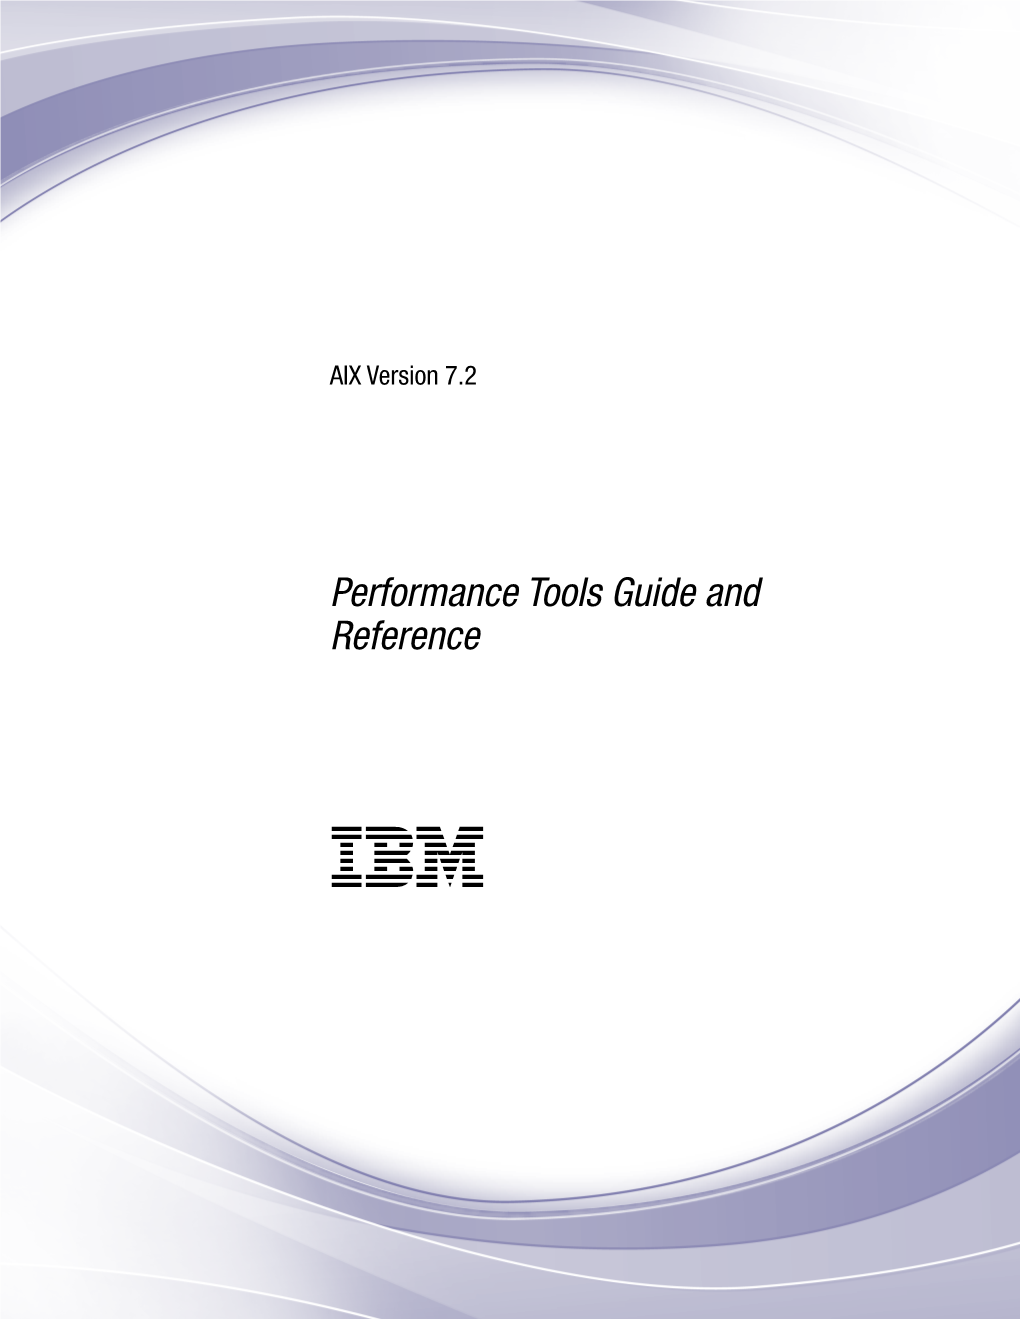 AIX Version 7.2: Performance Tools Guide and Reference About This Document